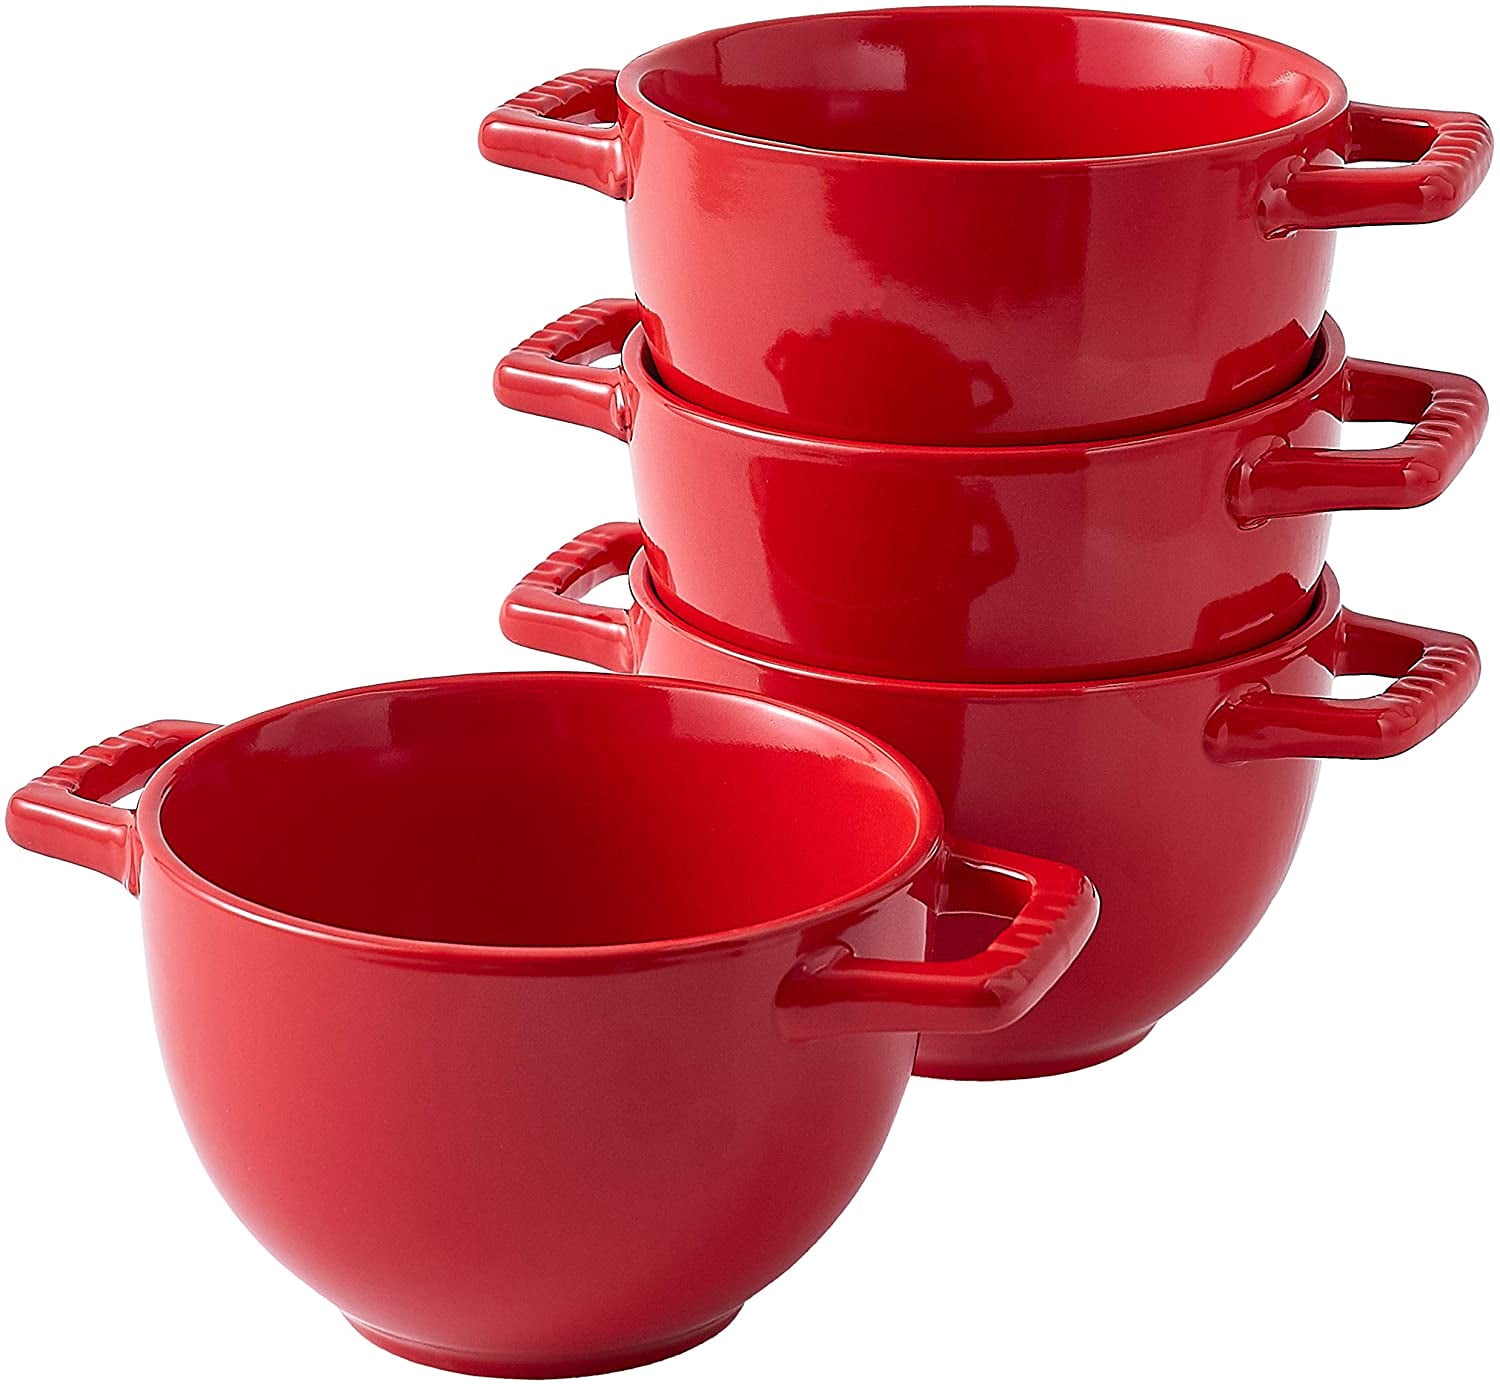 Large Soup Bowls with Handles, 25 Oz Microwavable and Oven Safe